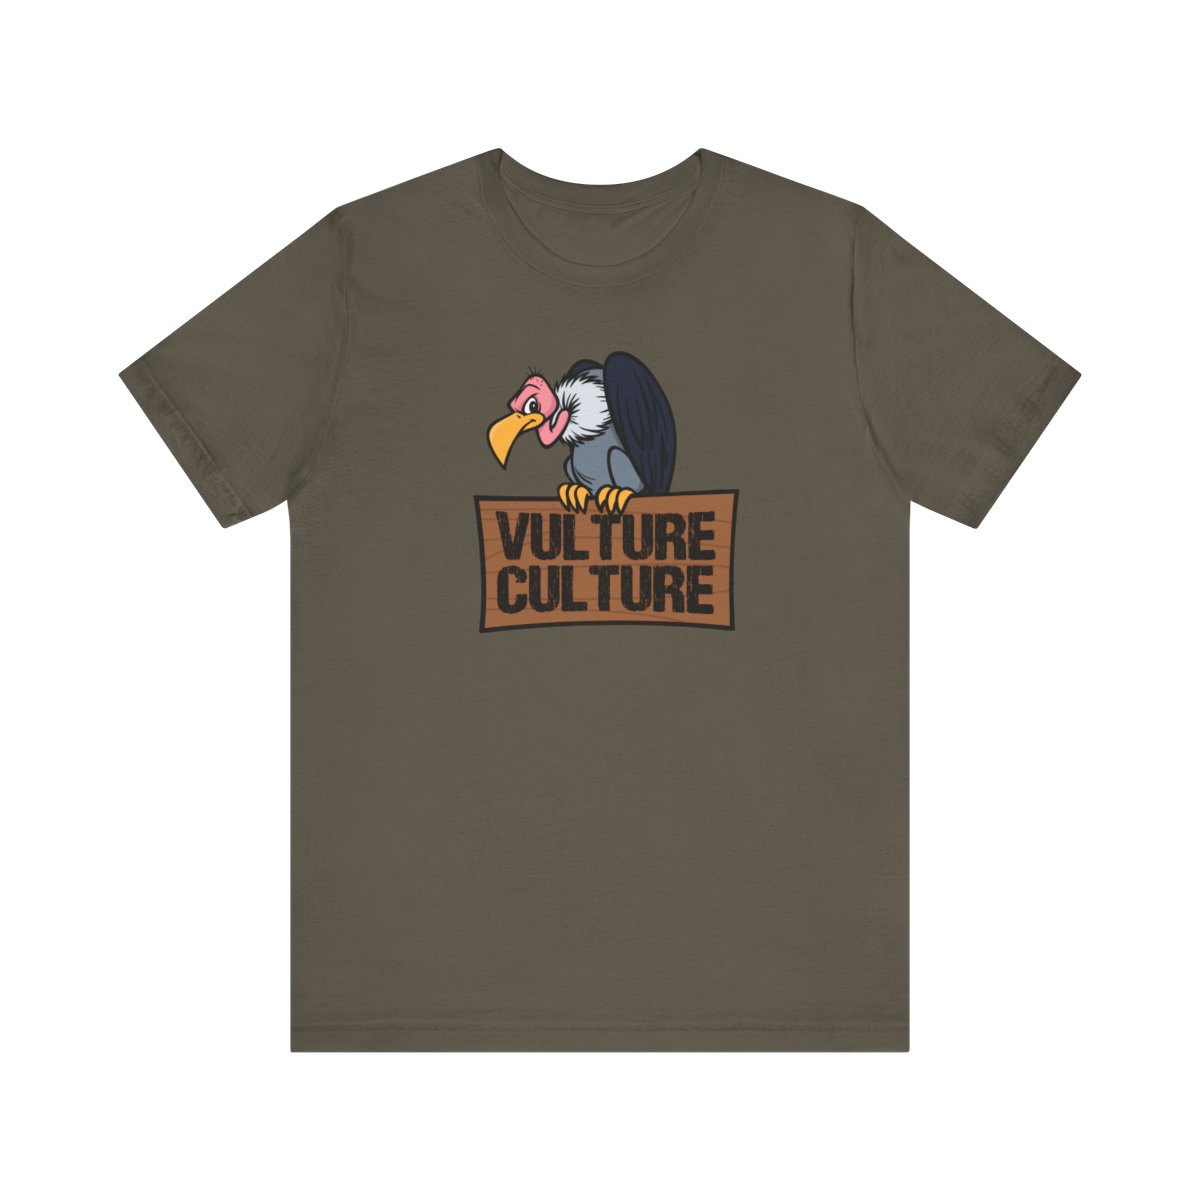 Vulture Culture Unisex S/S Tee product thumbnail image